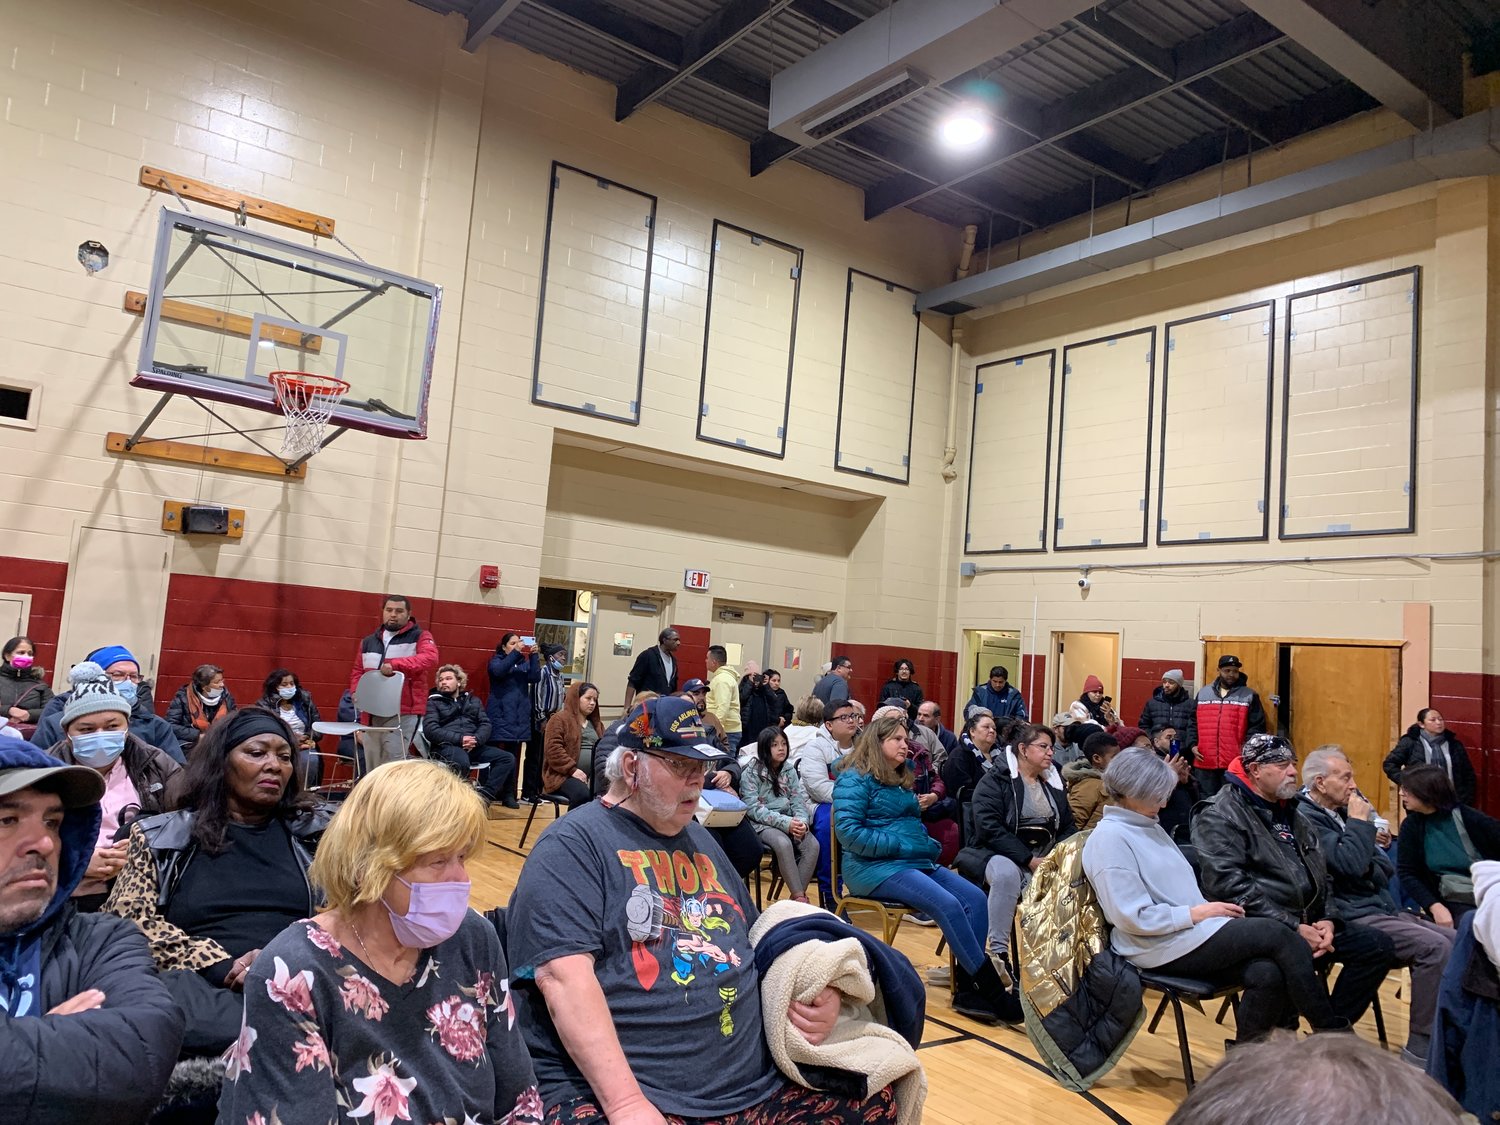 People crowded the Five Towns Community Center gym on Jan. 25 for the first community meeting to address the county’s request for proposals for the future of the center.